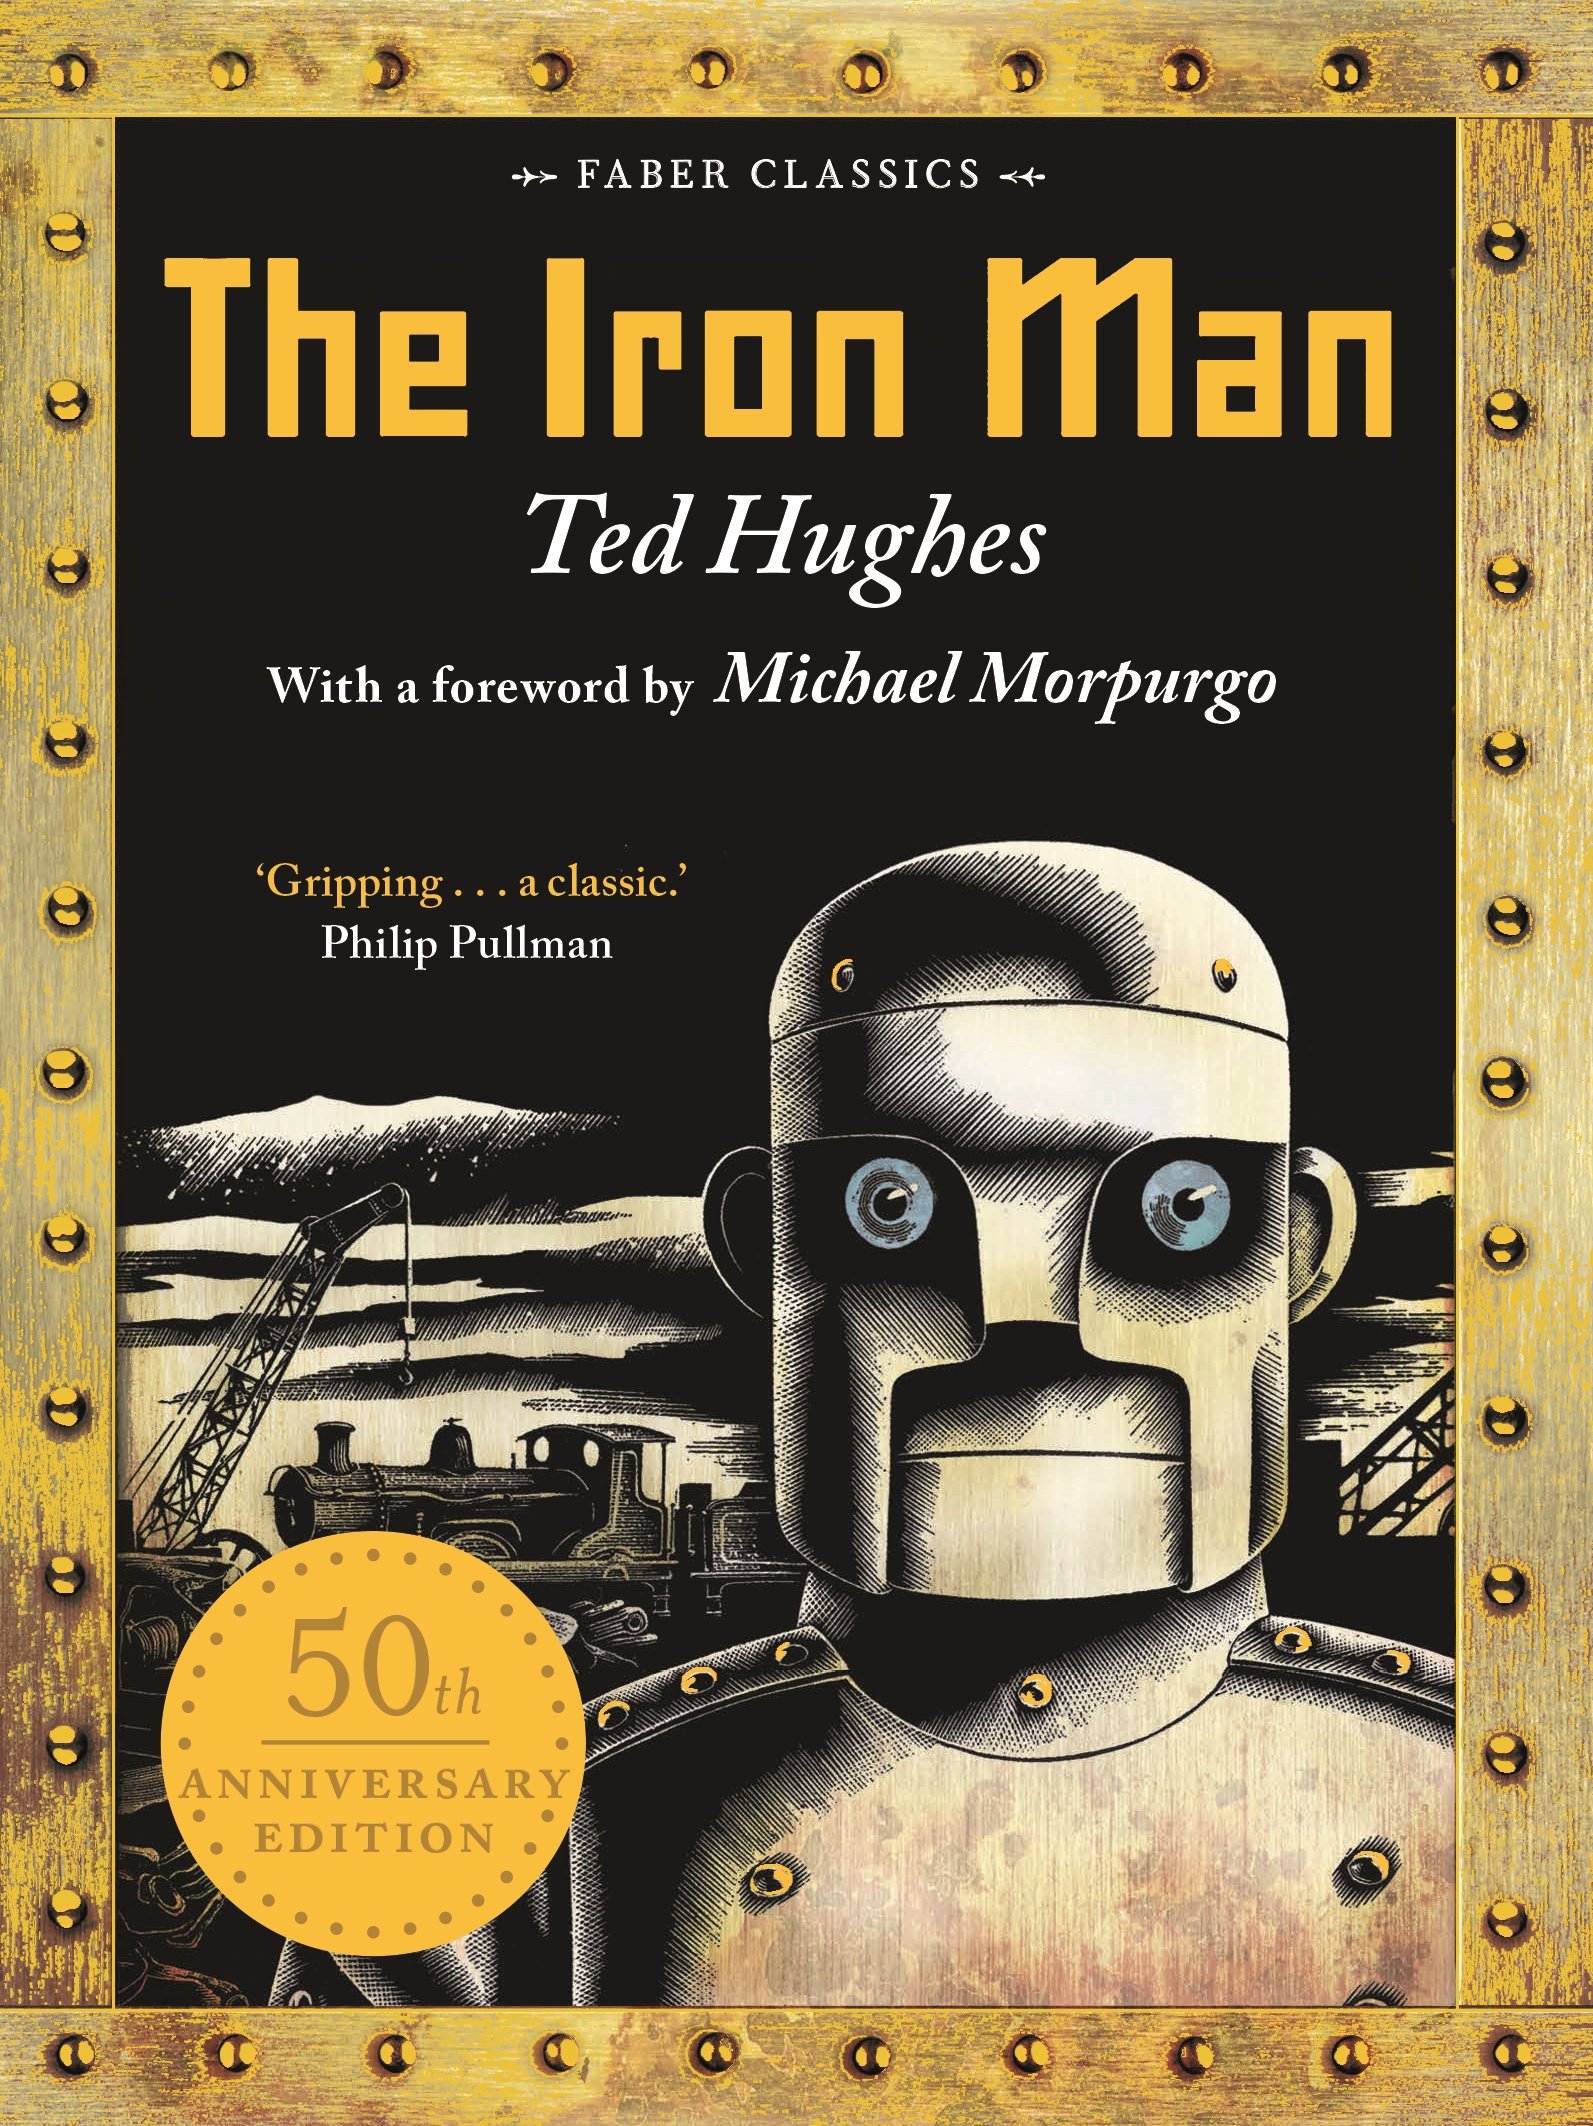 The Iron Man (50th Anniversary Edition) by Ted Hughes | Faber